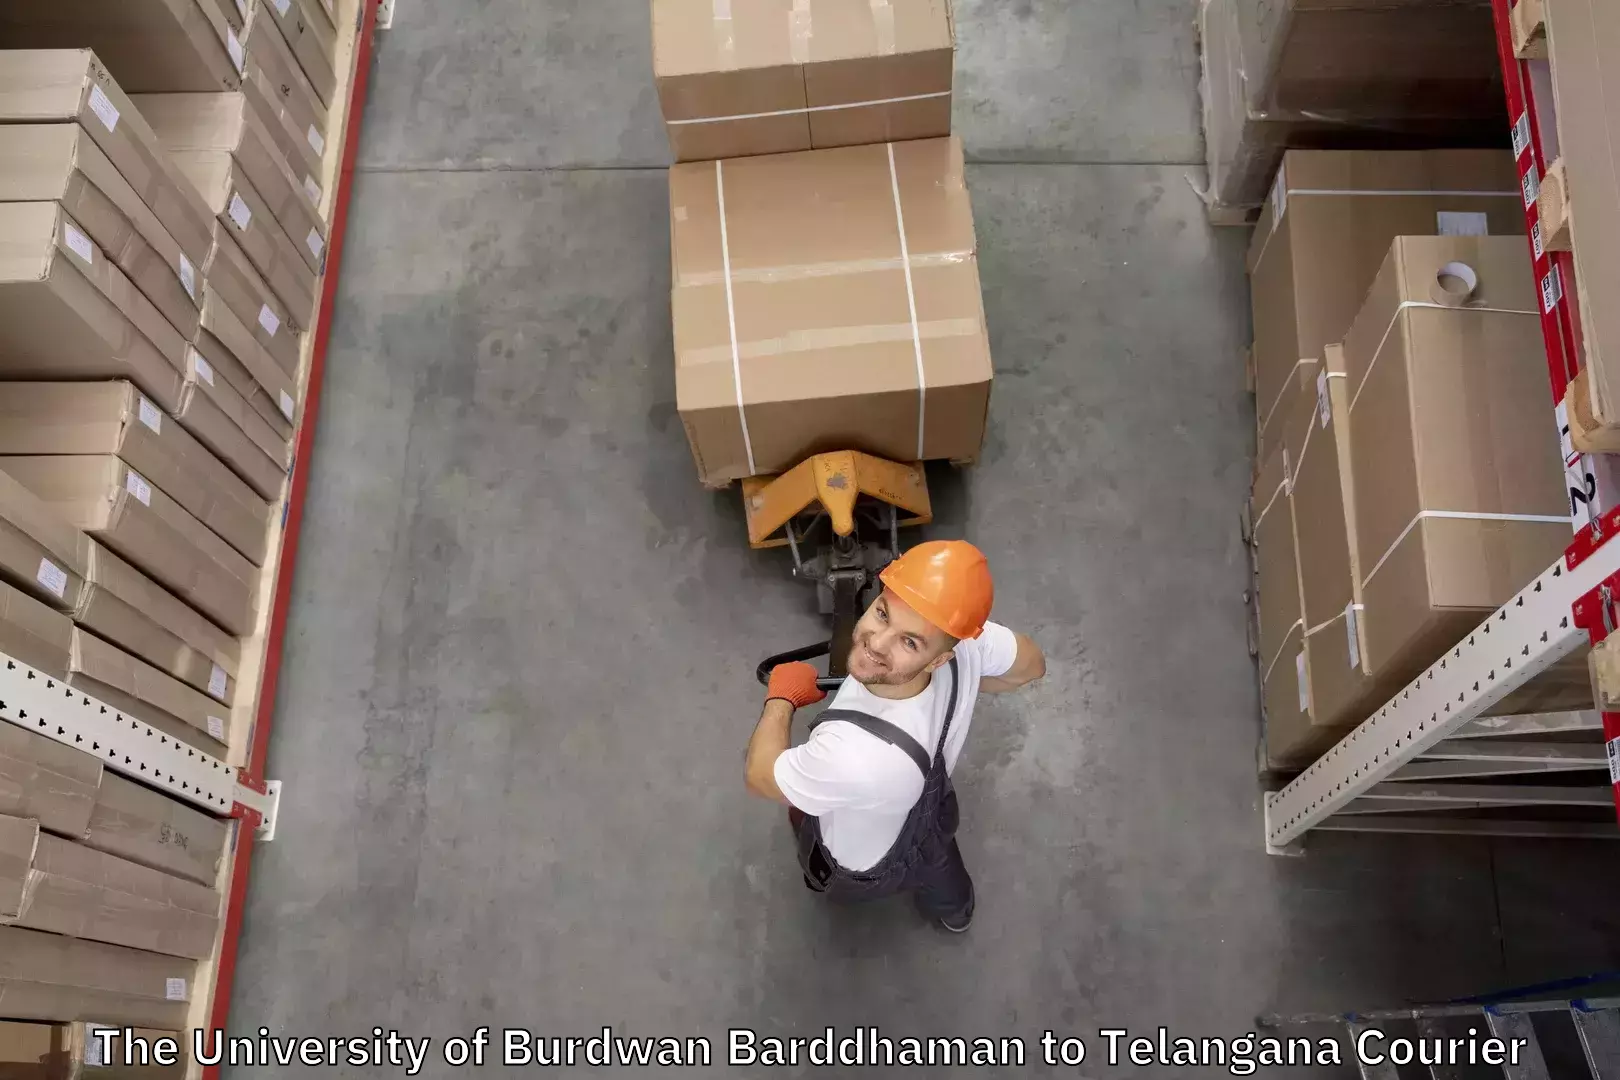 Luggage storage and delivery The University of Burdwan Barddhaman to University of Hyderabad